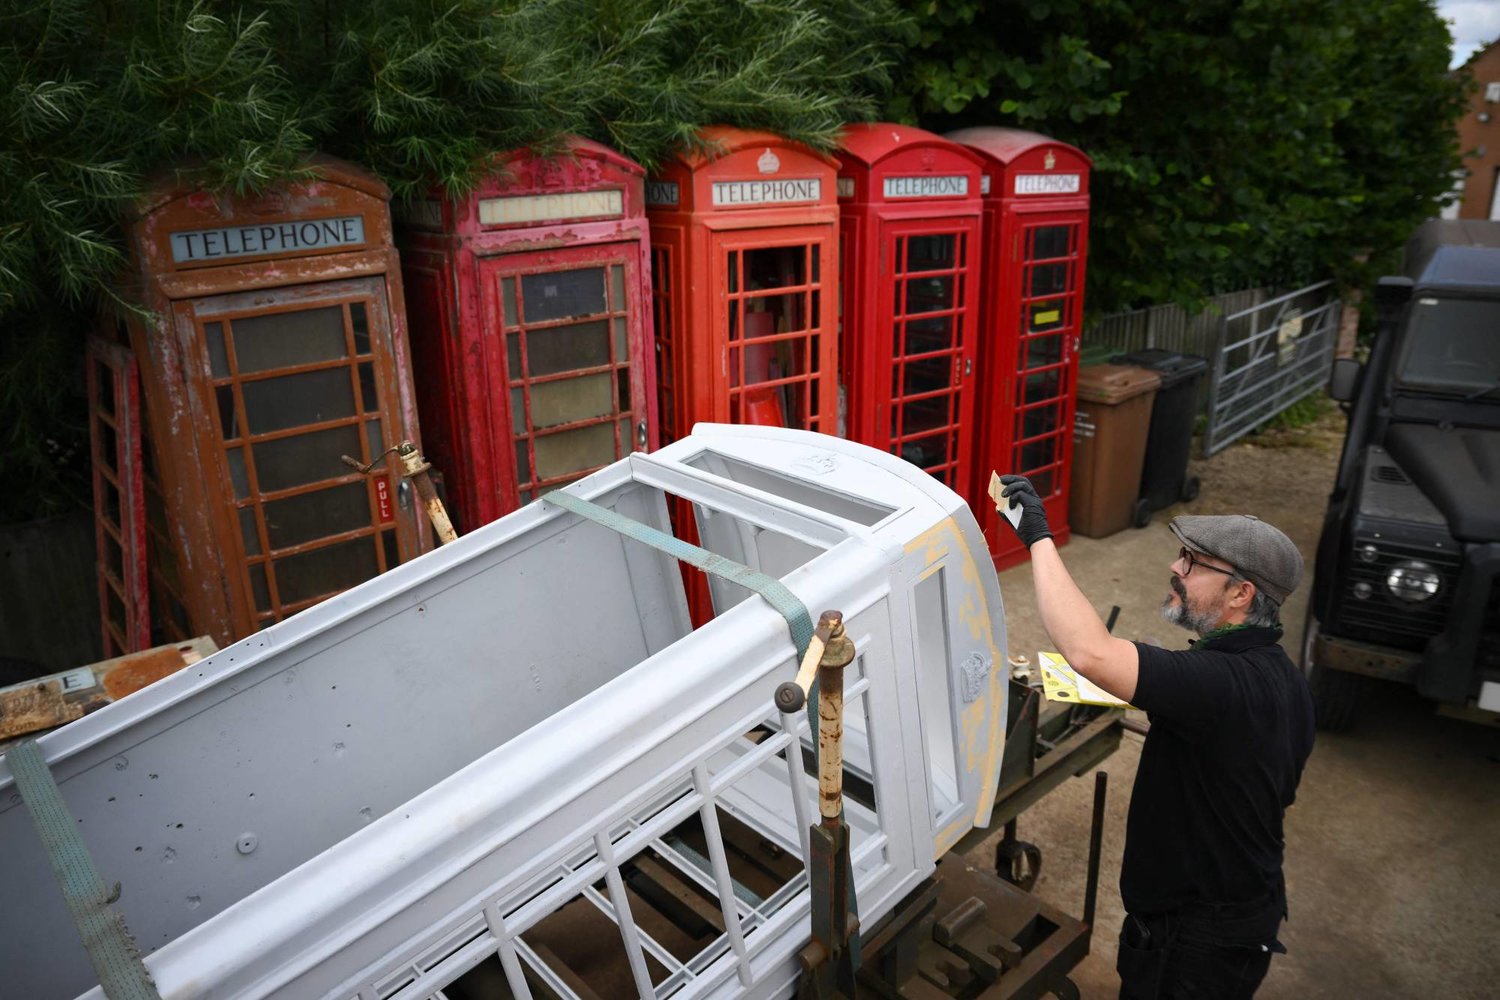 Britain's Beloved Red Phone booth Repurposed for the Digital Age Once symbols of London and Britain, the iconic red telephone booth have largely been retired in the mobile phone era. But many have now found new purpose as coffee shops, mini-libraries and more.